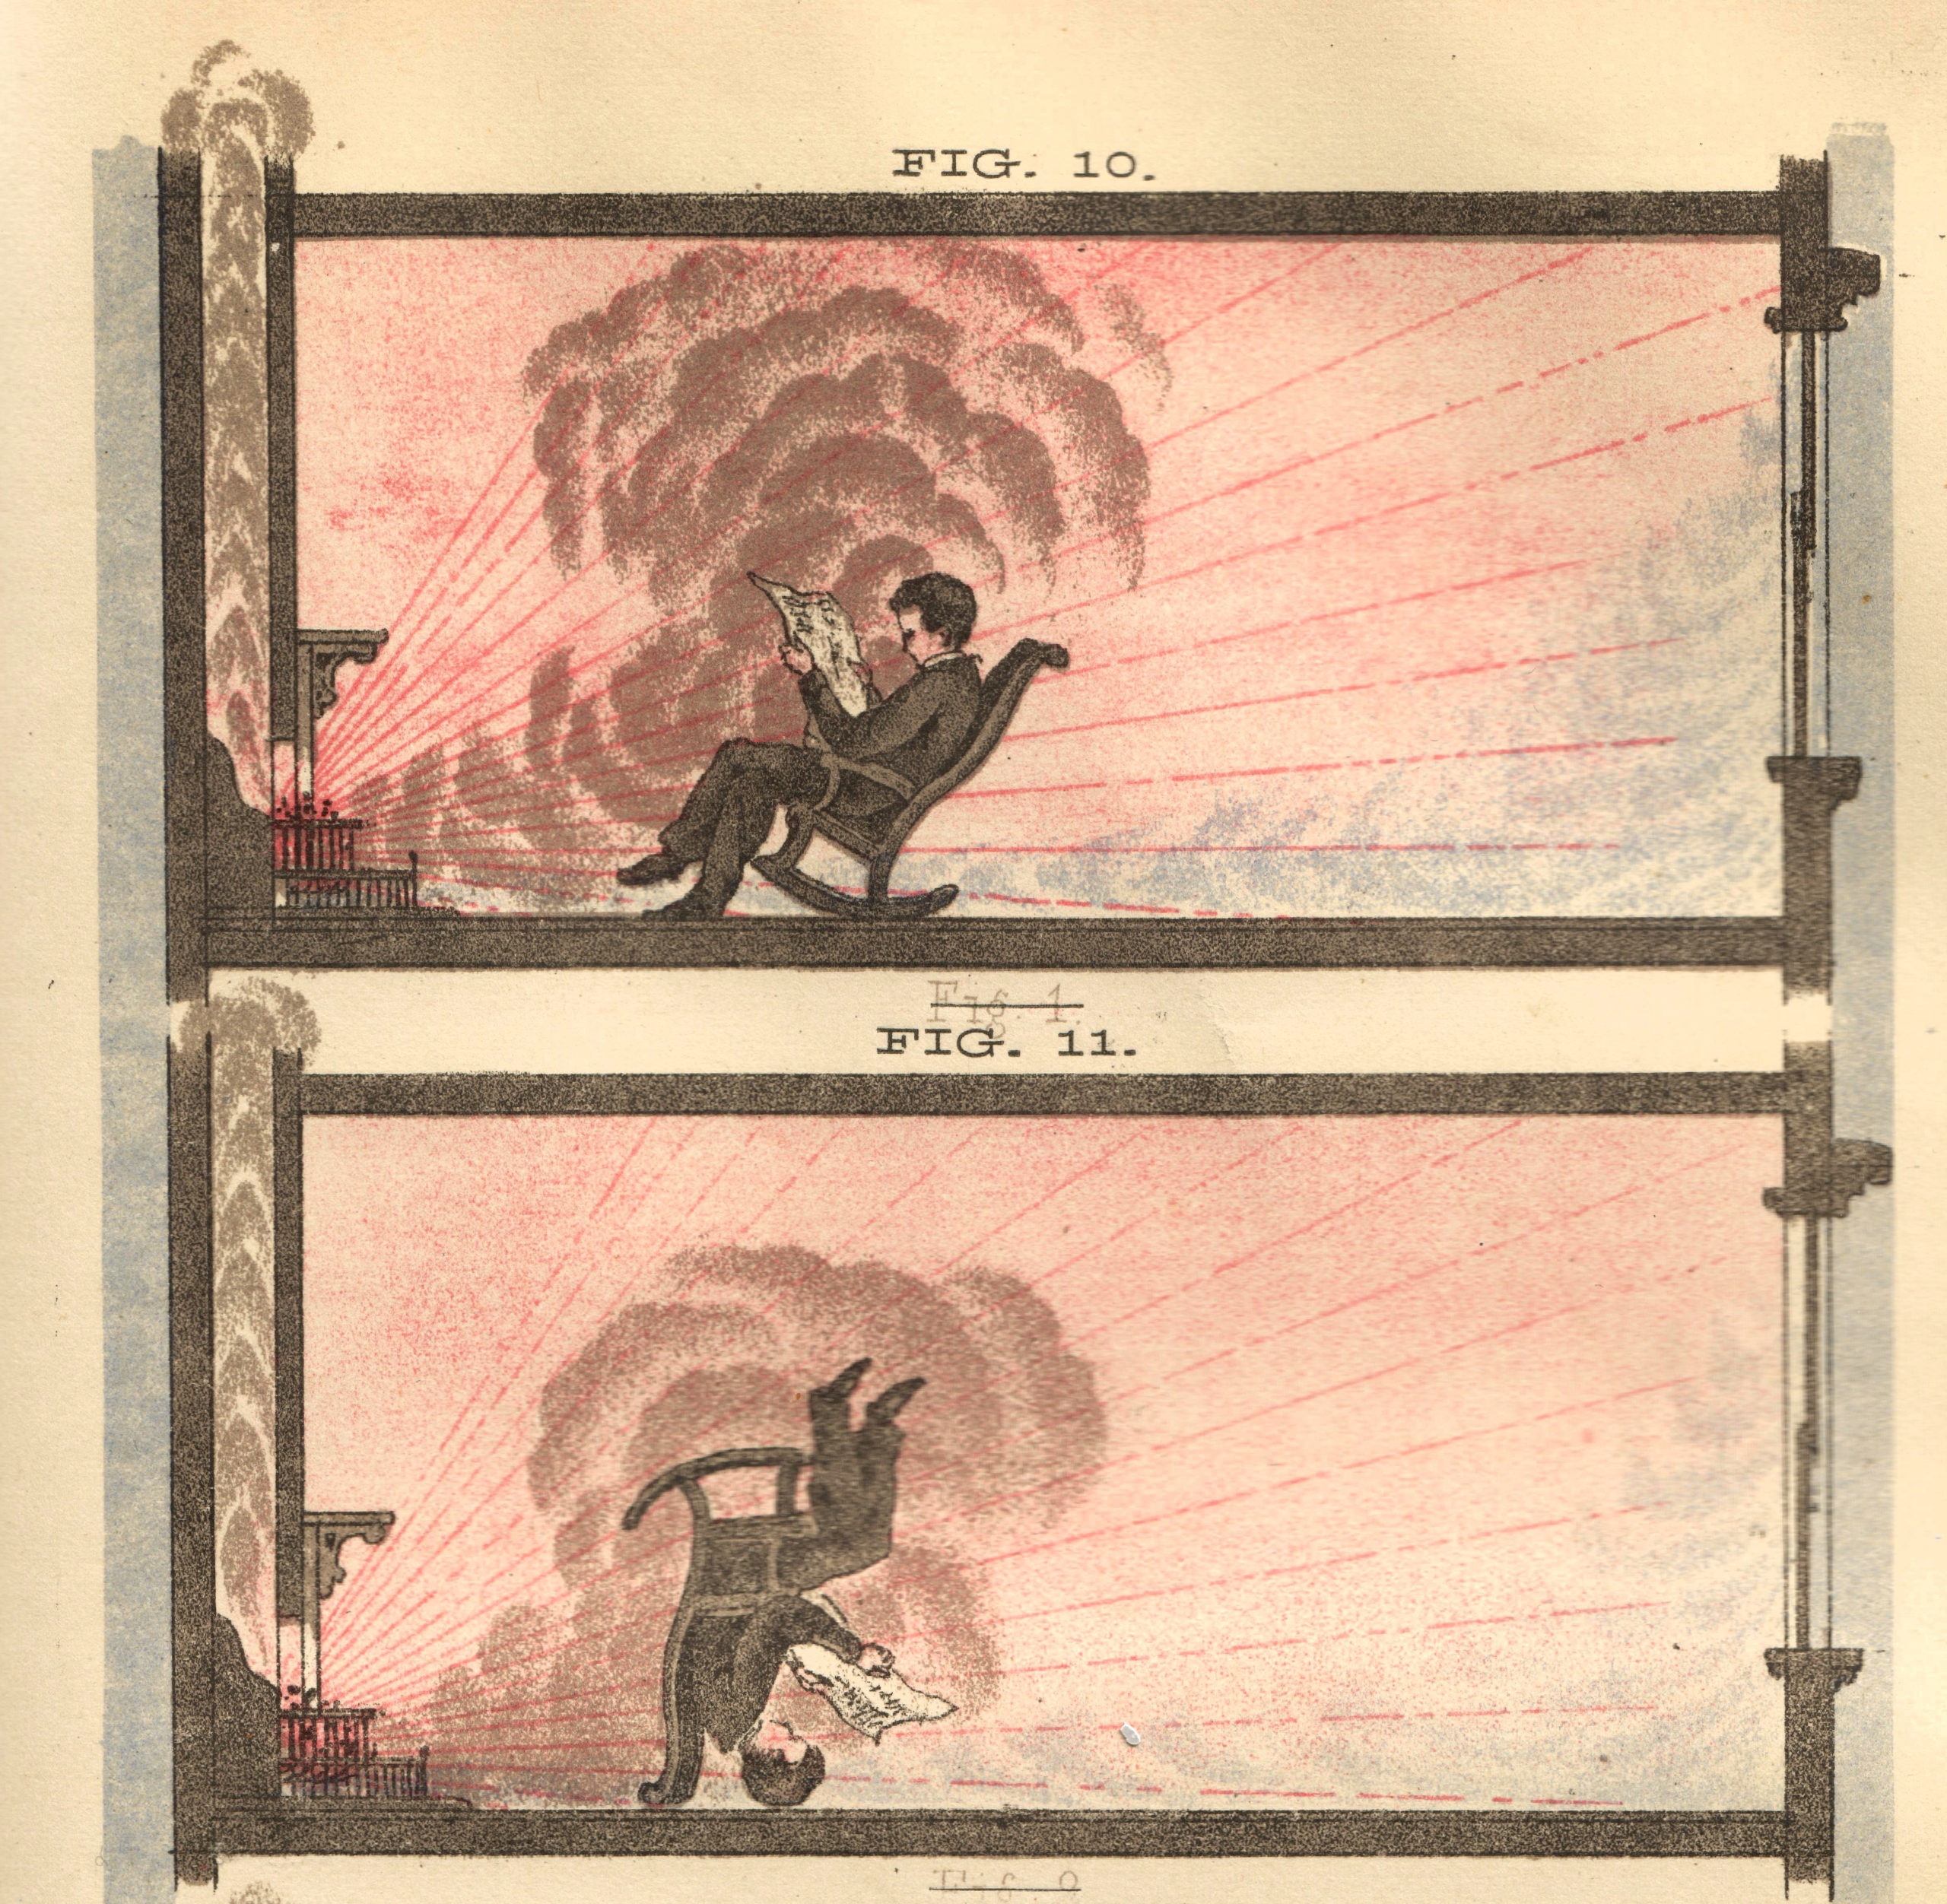 Two almost identical drawings, one on top of the other, illustrating a seated light-skinned person leisurely reading a newspaper in front of a smoking fireplace. The upper drawing depicts the person seated normally in front of the fire, the lower drawing depicts the seated person completely upside down.